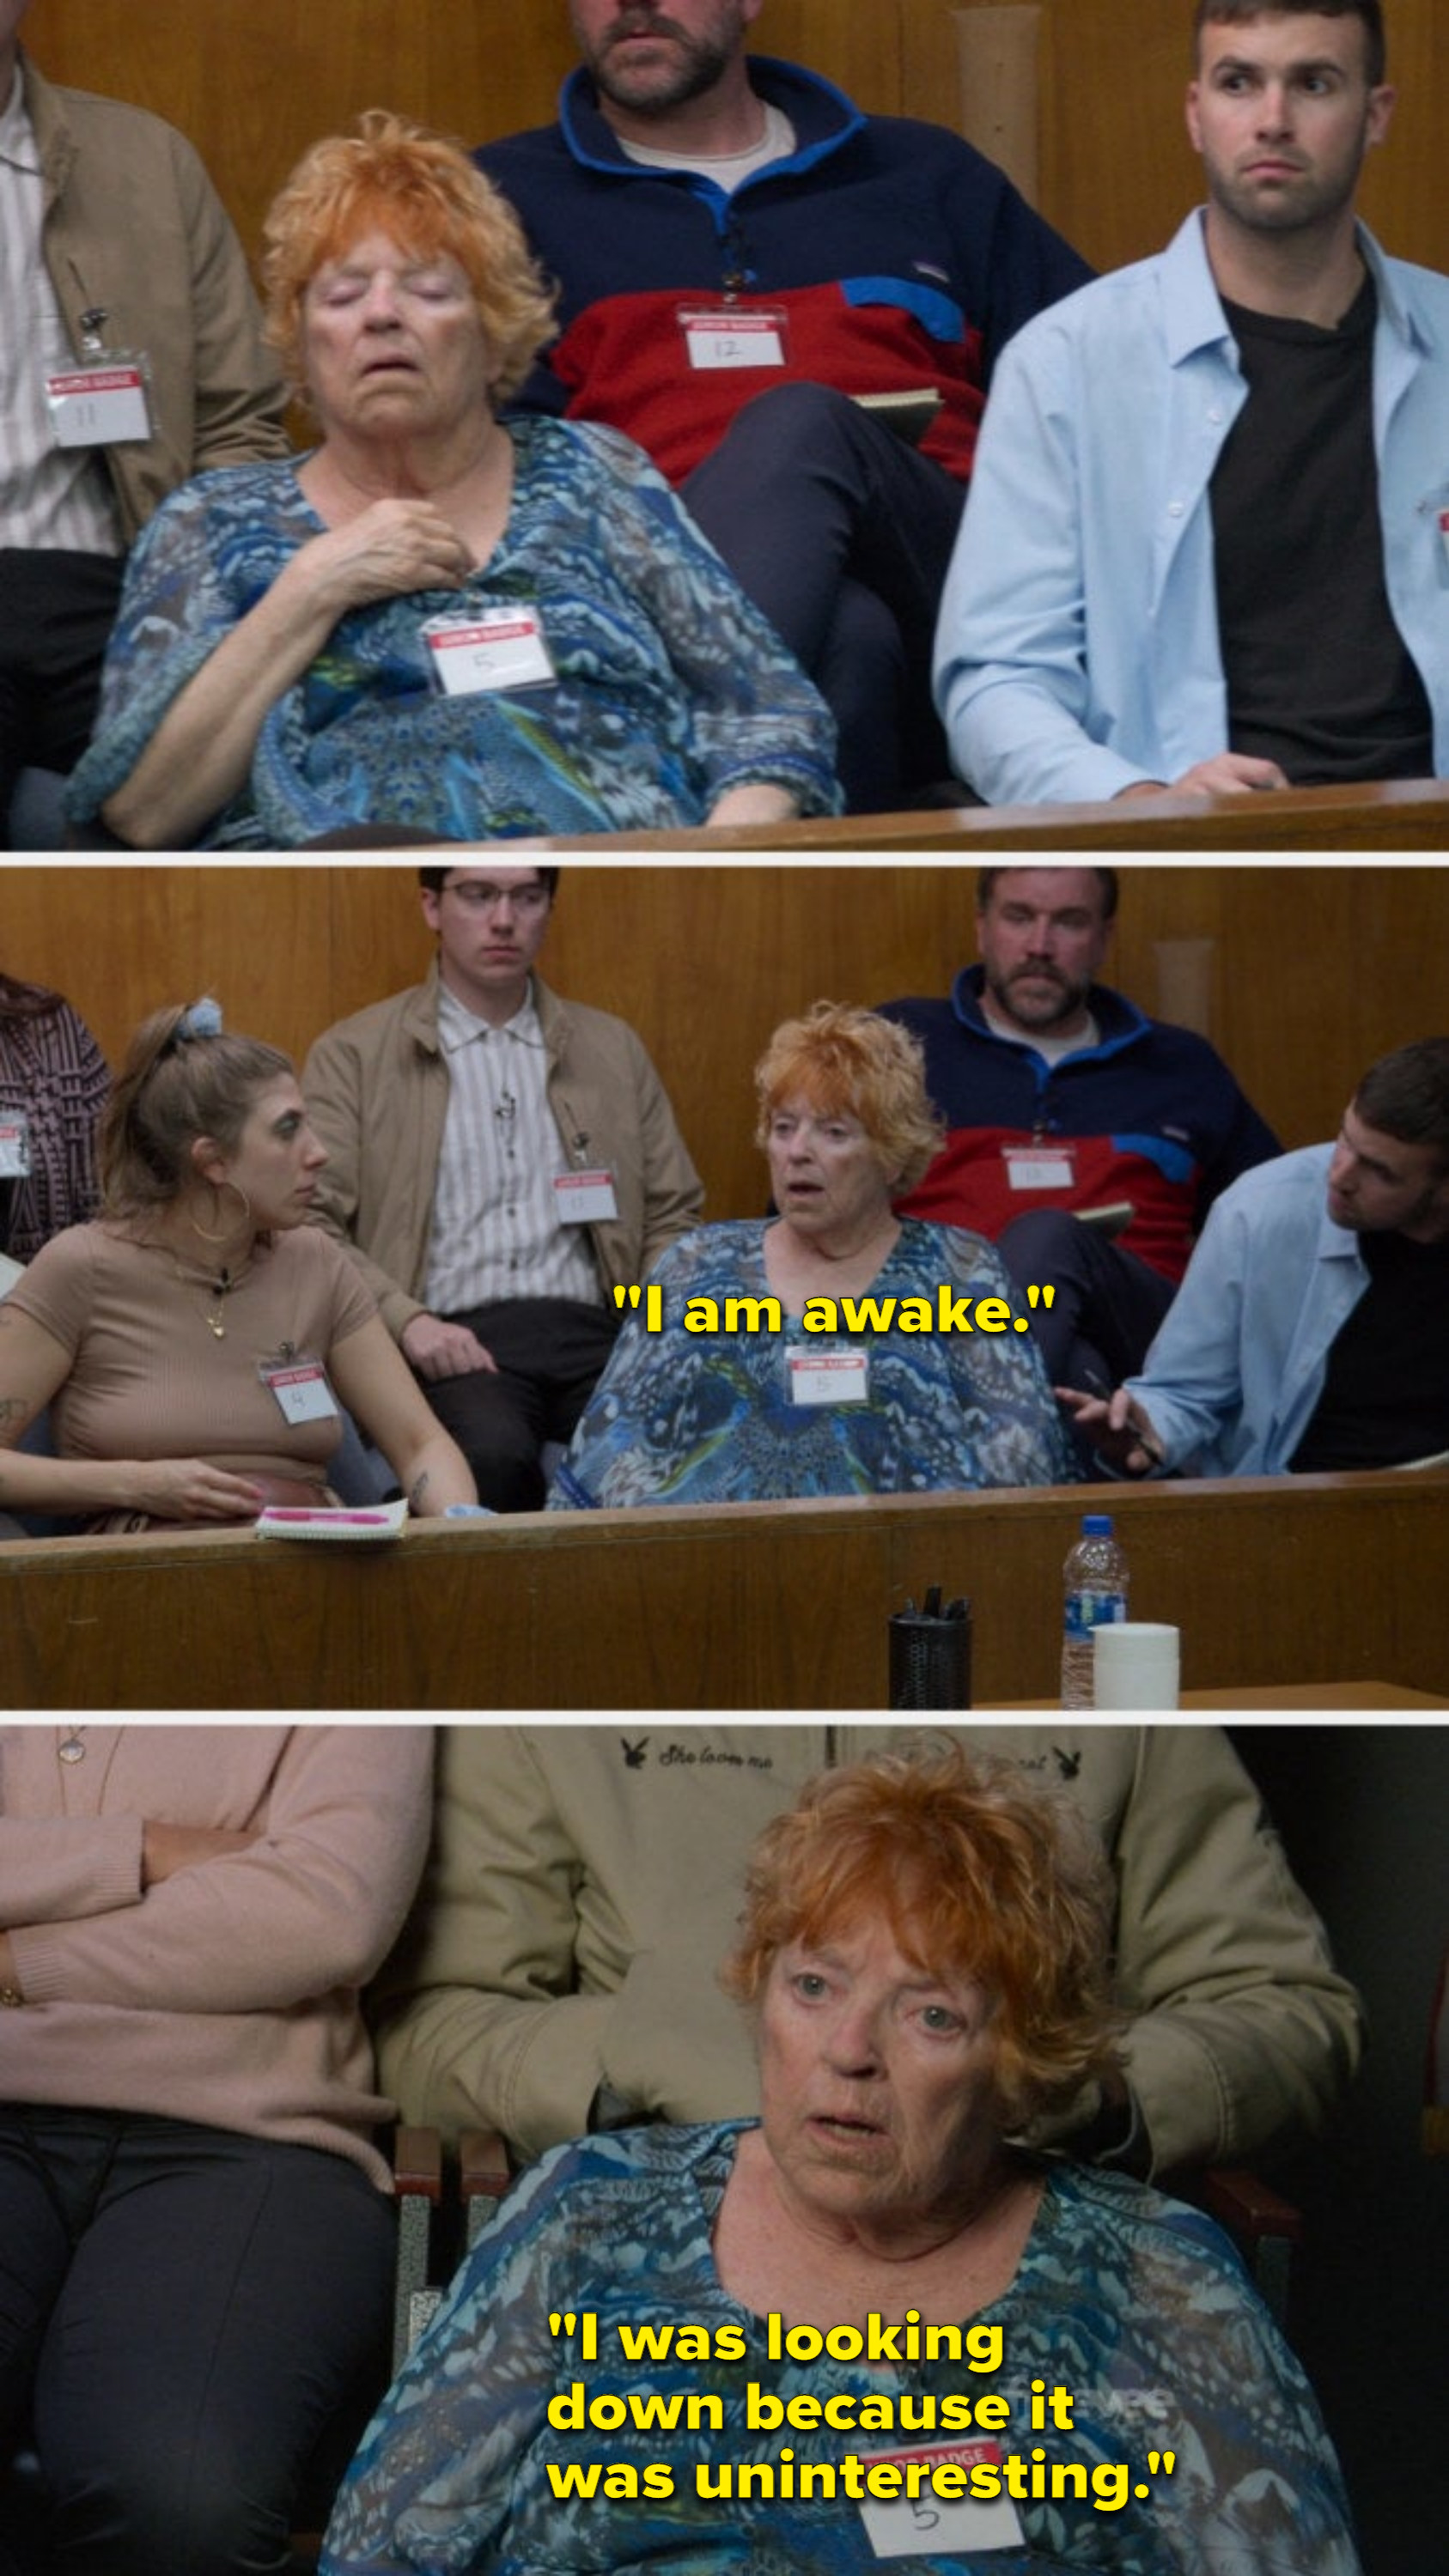 Barbara falls asleep during court, then claims she was awake the whole time